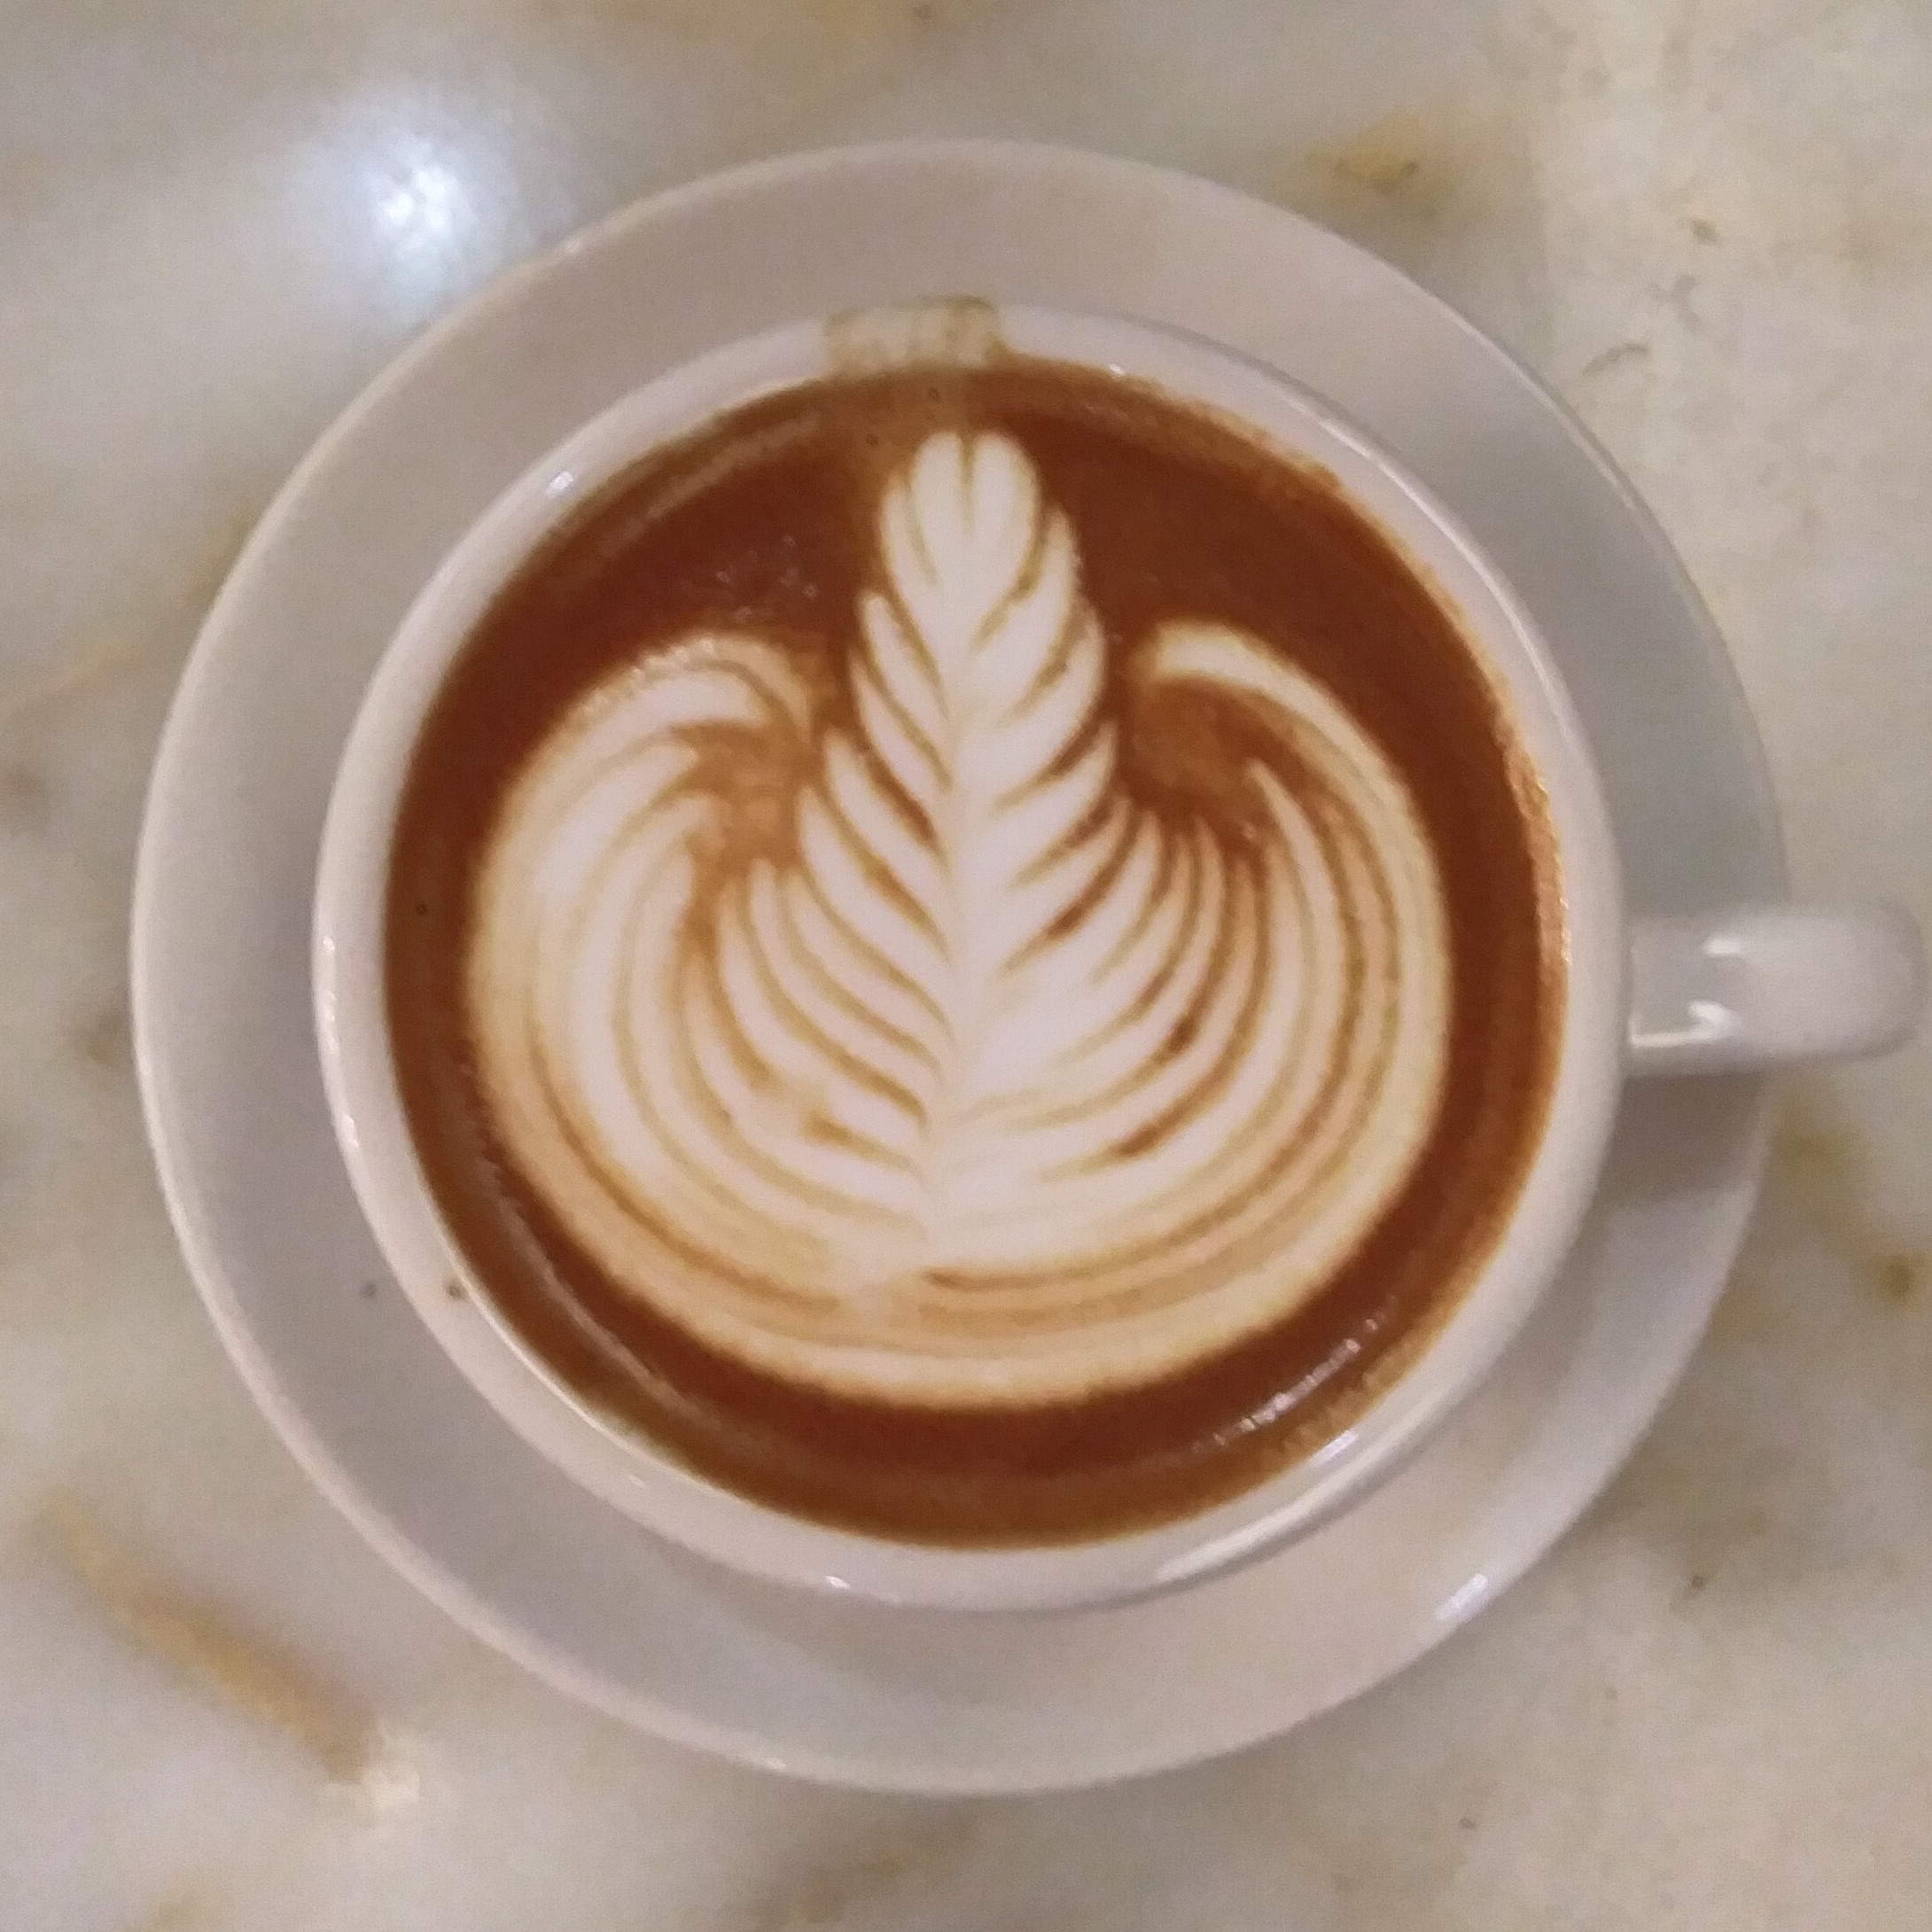 Some gorgeous latte art in Amanda's cappuccino at the Doughnut Vault on Canal Street, Chicago.